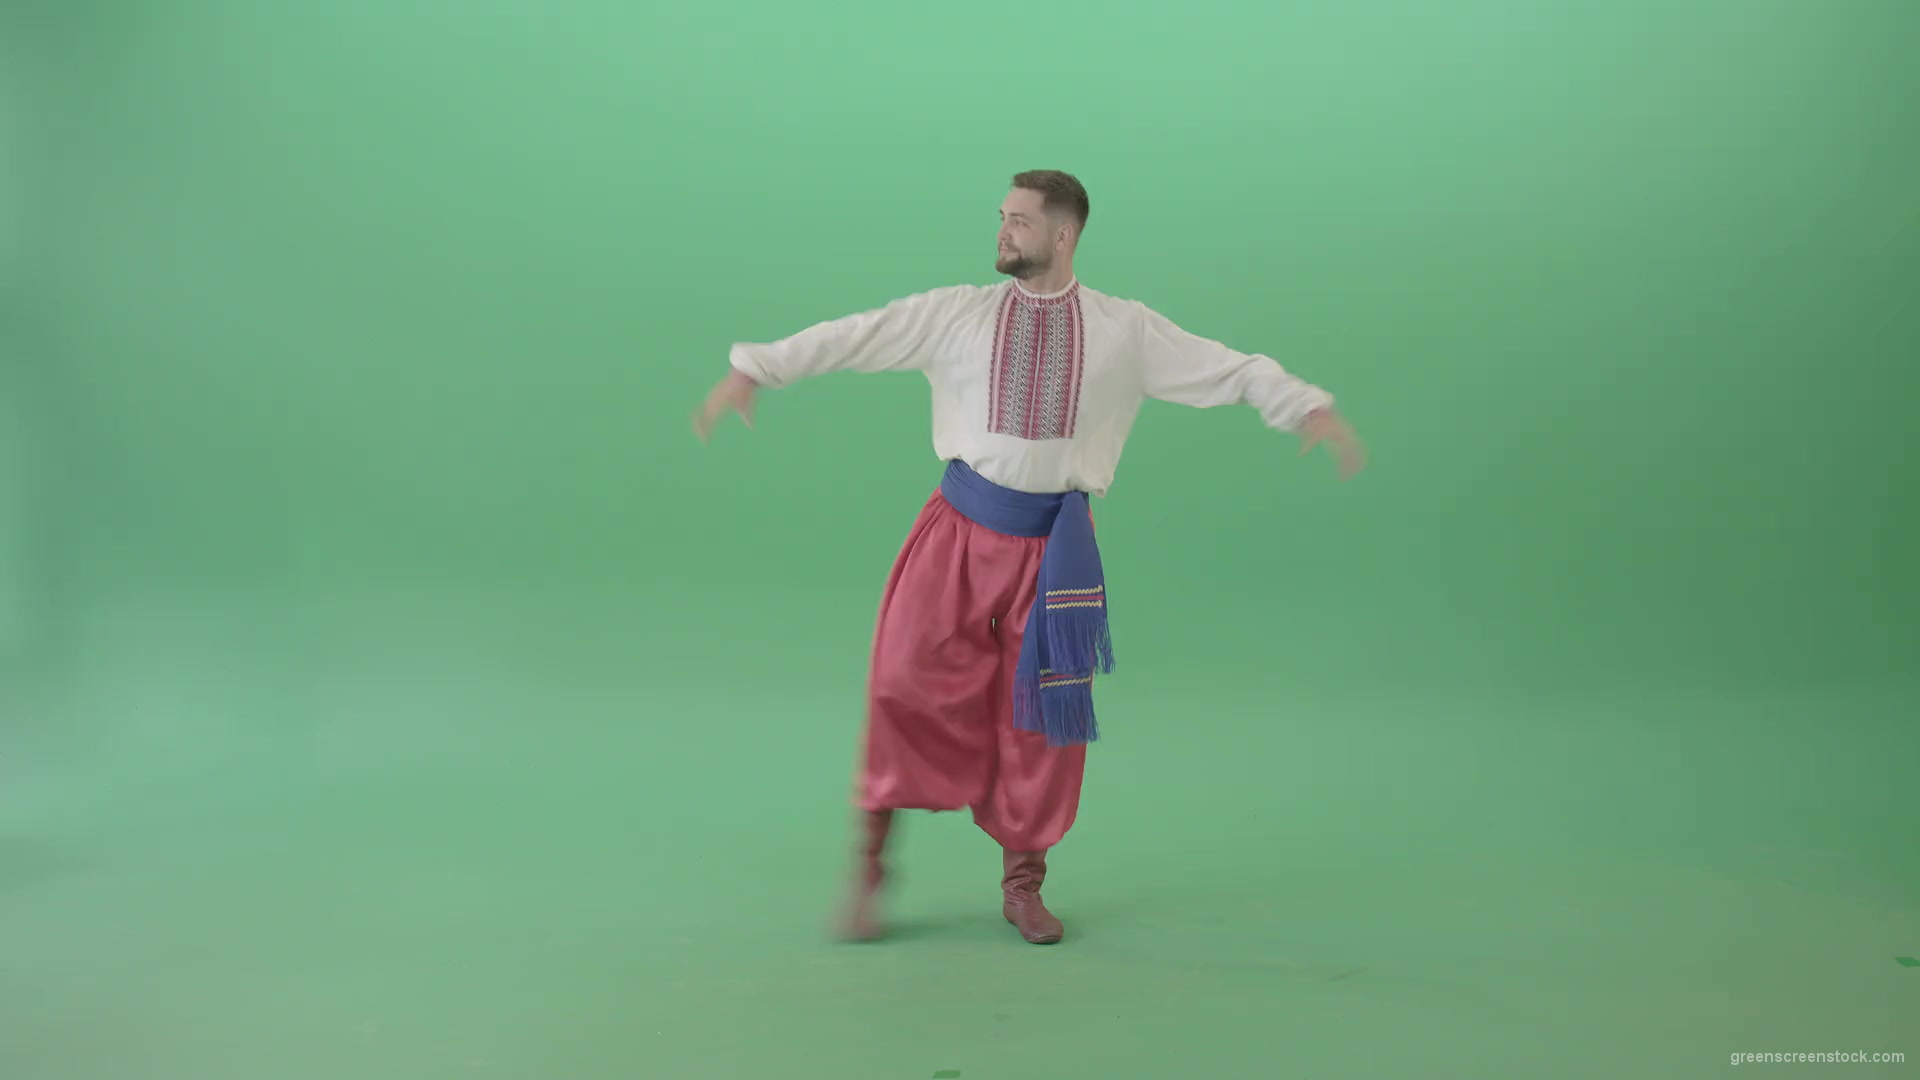 Slavic-Ukraine-folk-dance-by-UA-Cossack-man-jumping-isolated-on-Green-Background-4K-Video-Footage-1920_001 Green Screen Stock